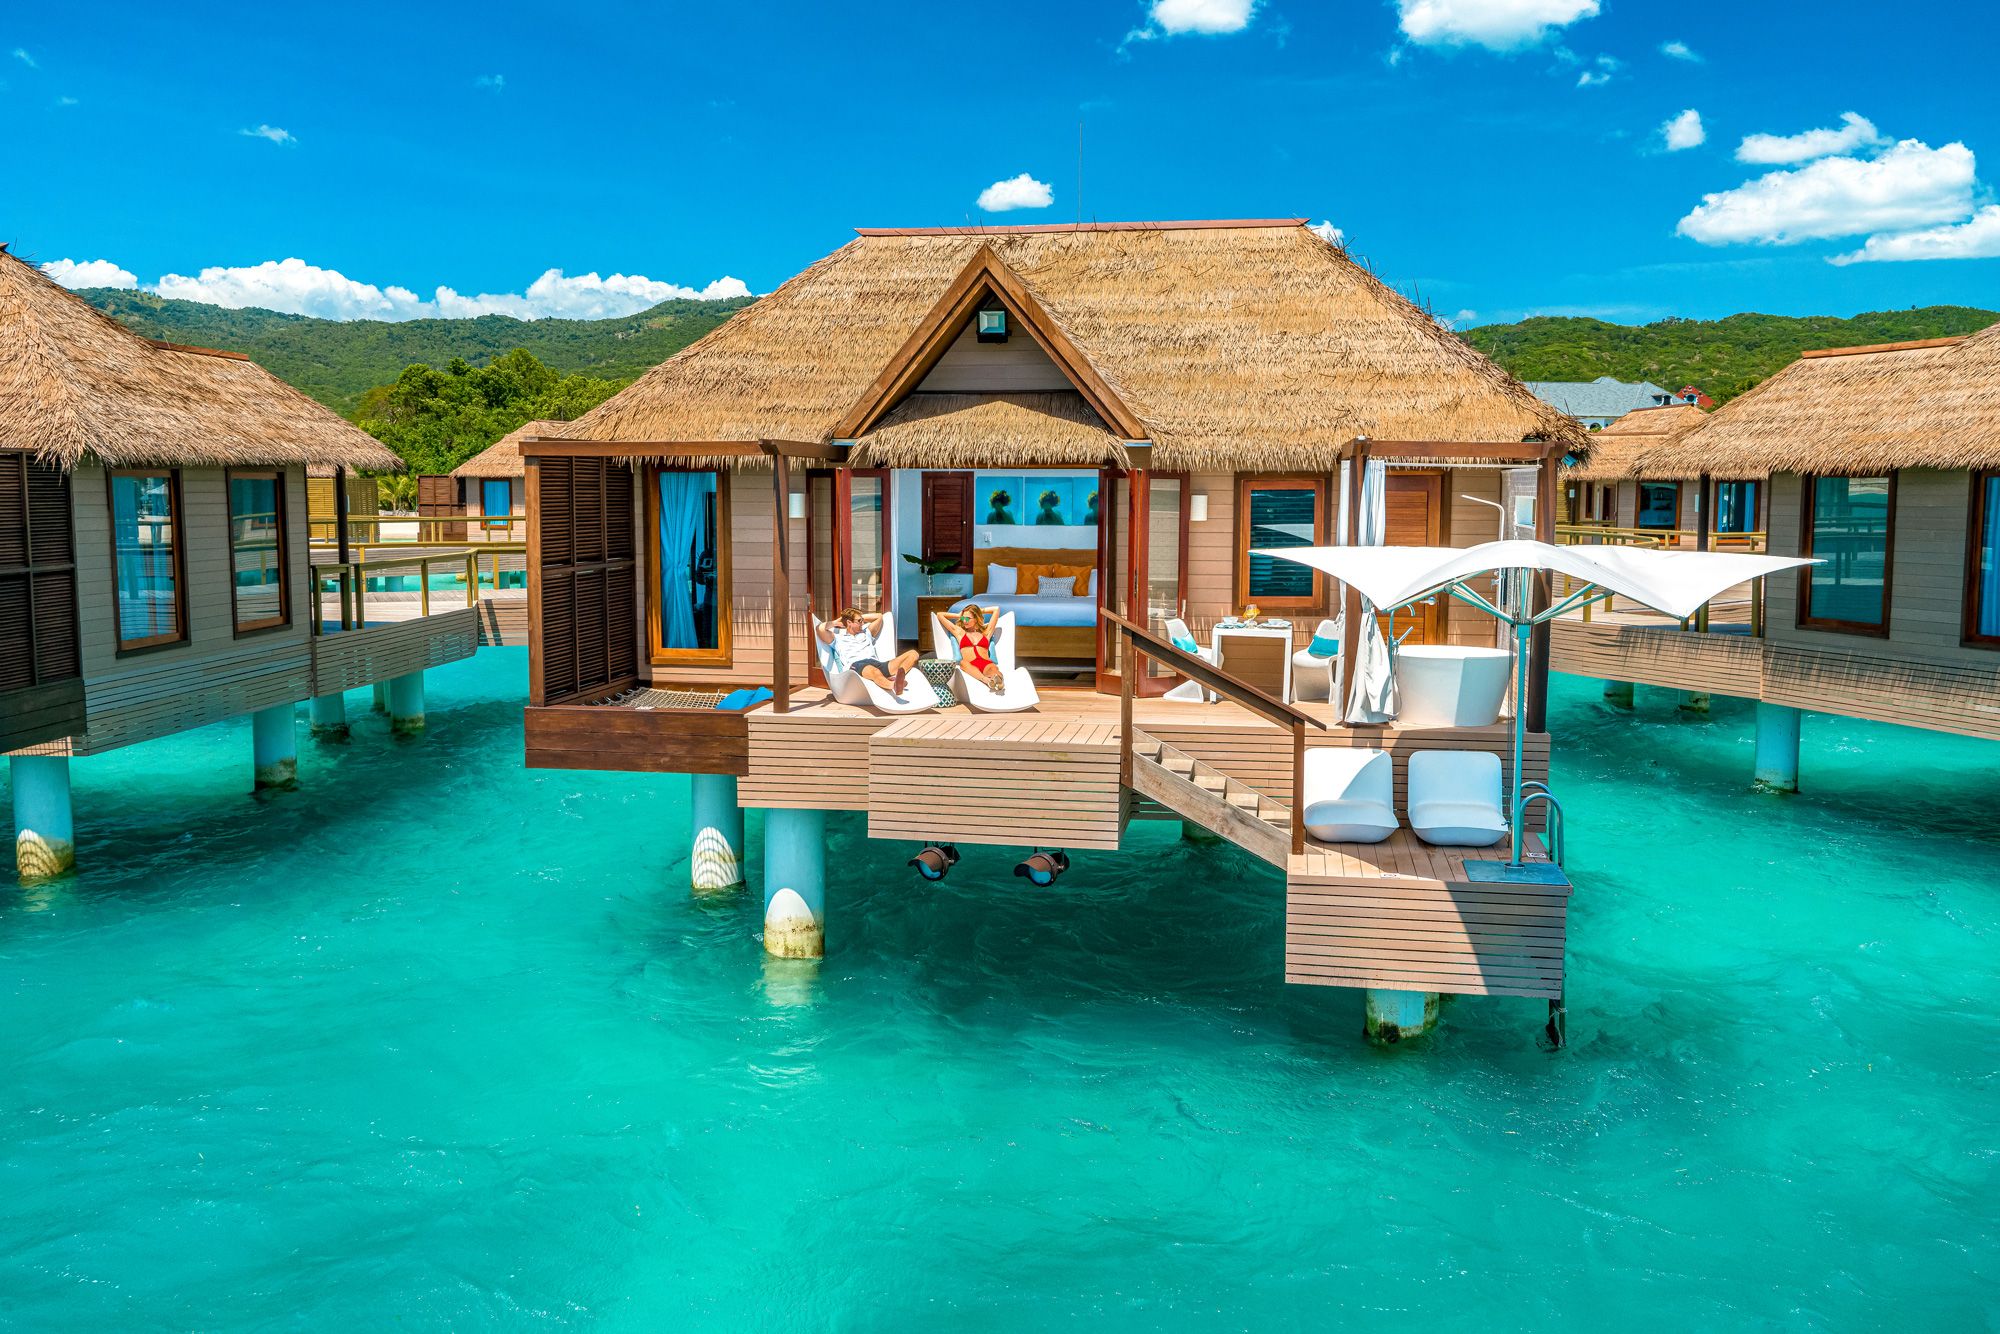 Sandals-South-Coast-Over-the-Water-Butler-Honeymoon-Bungalow-Out